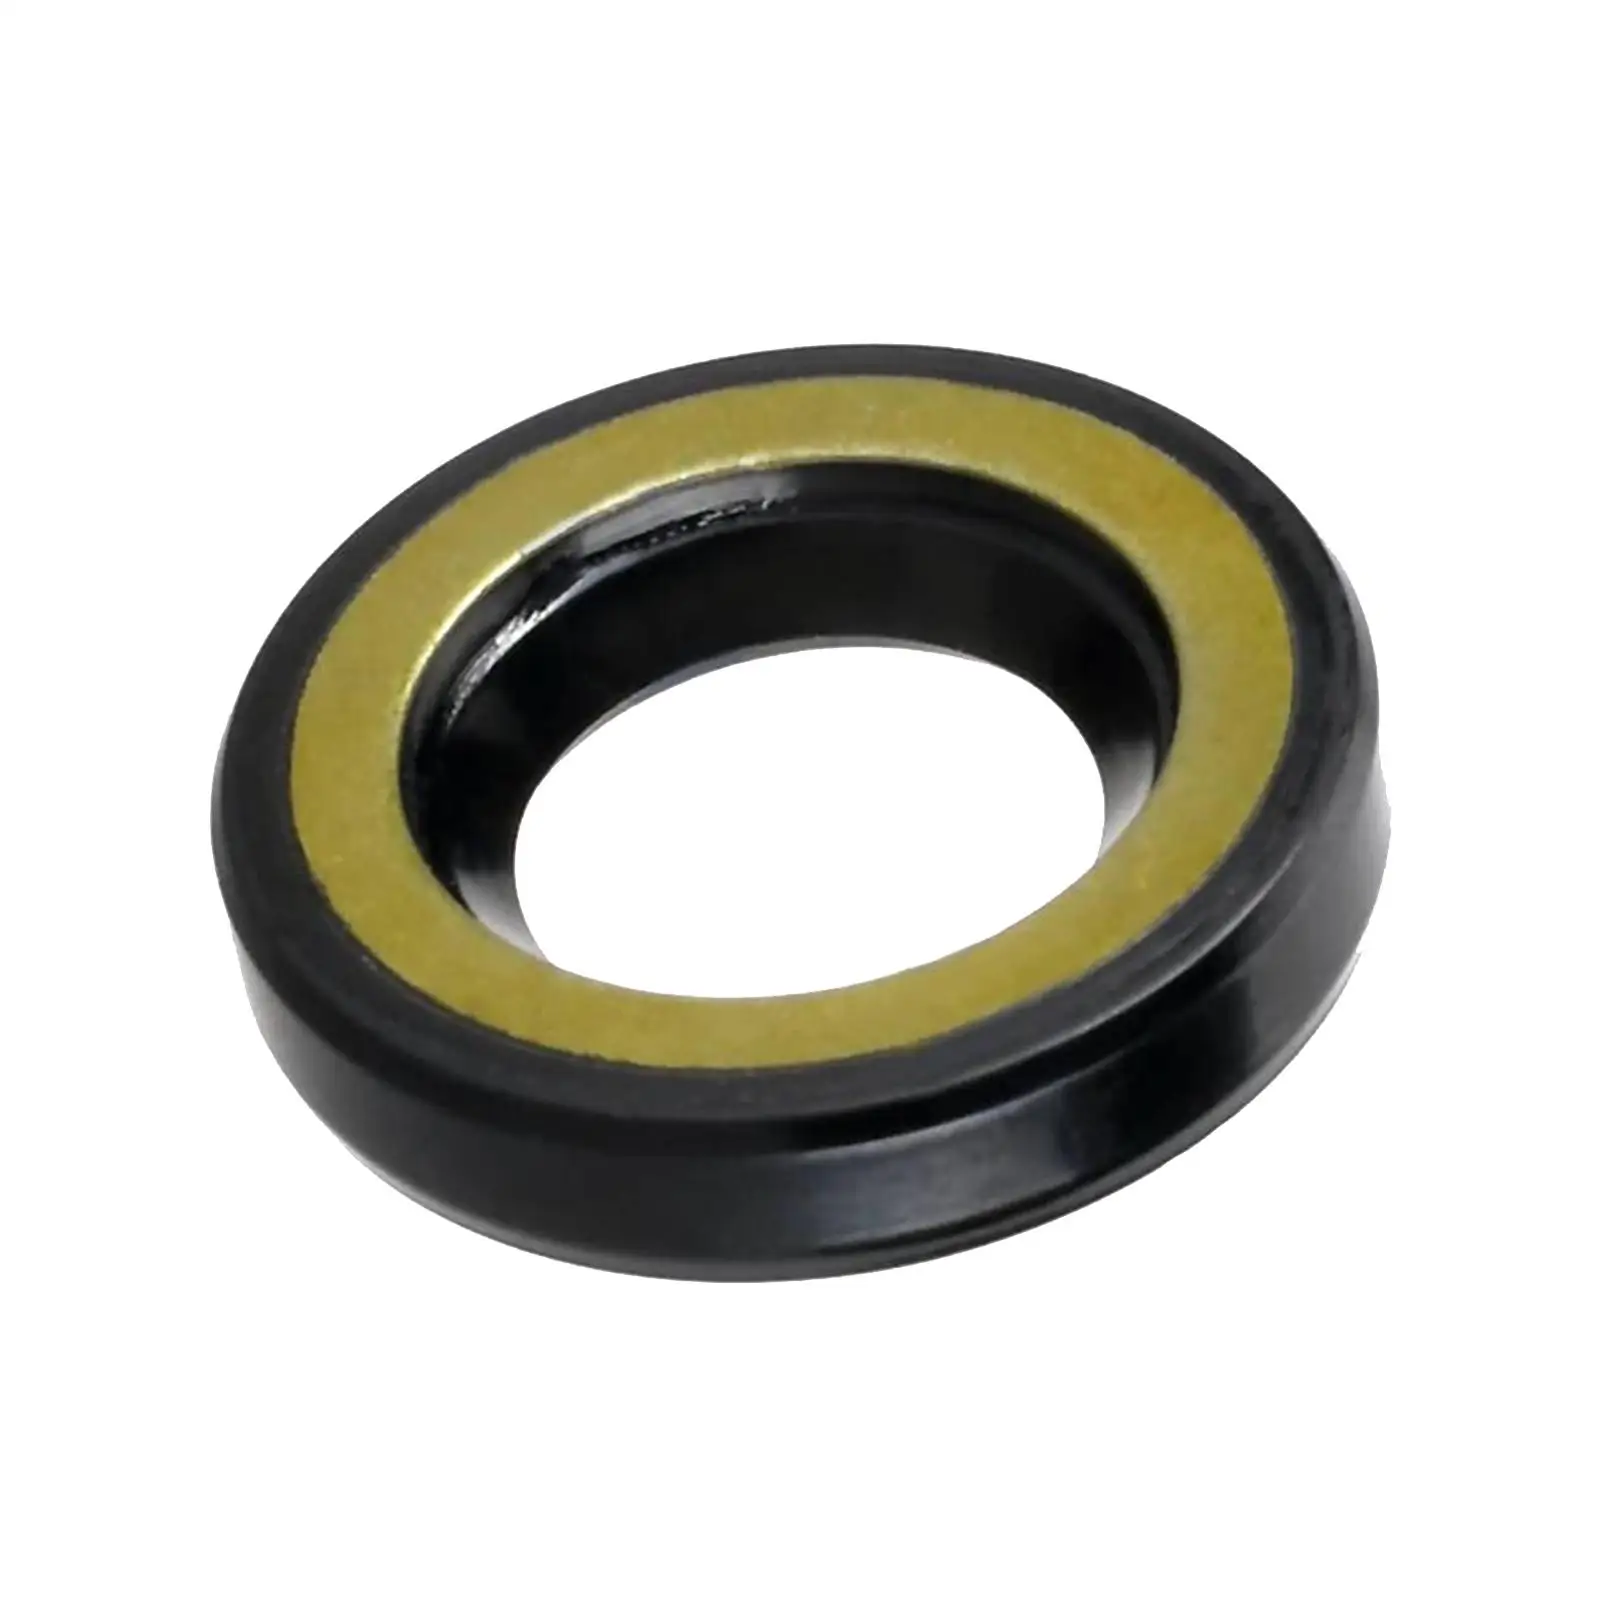 Oil Seal 93101-20M07 for Yamaha 2T 25HP 30HP Easy to Install Durable